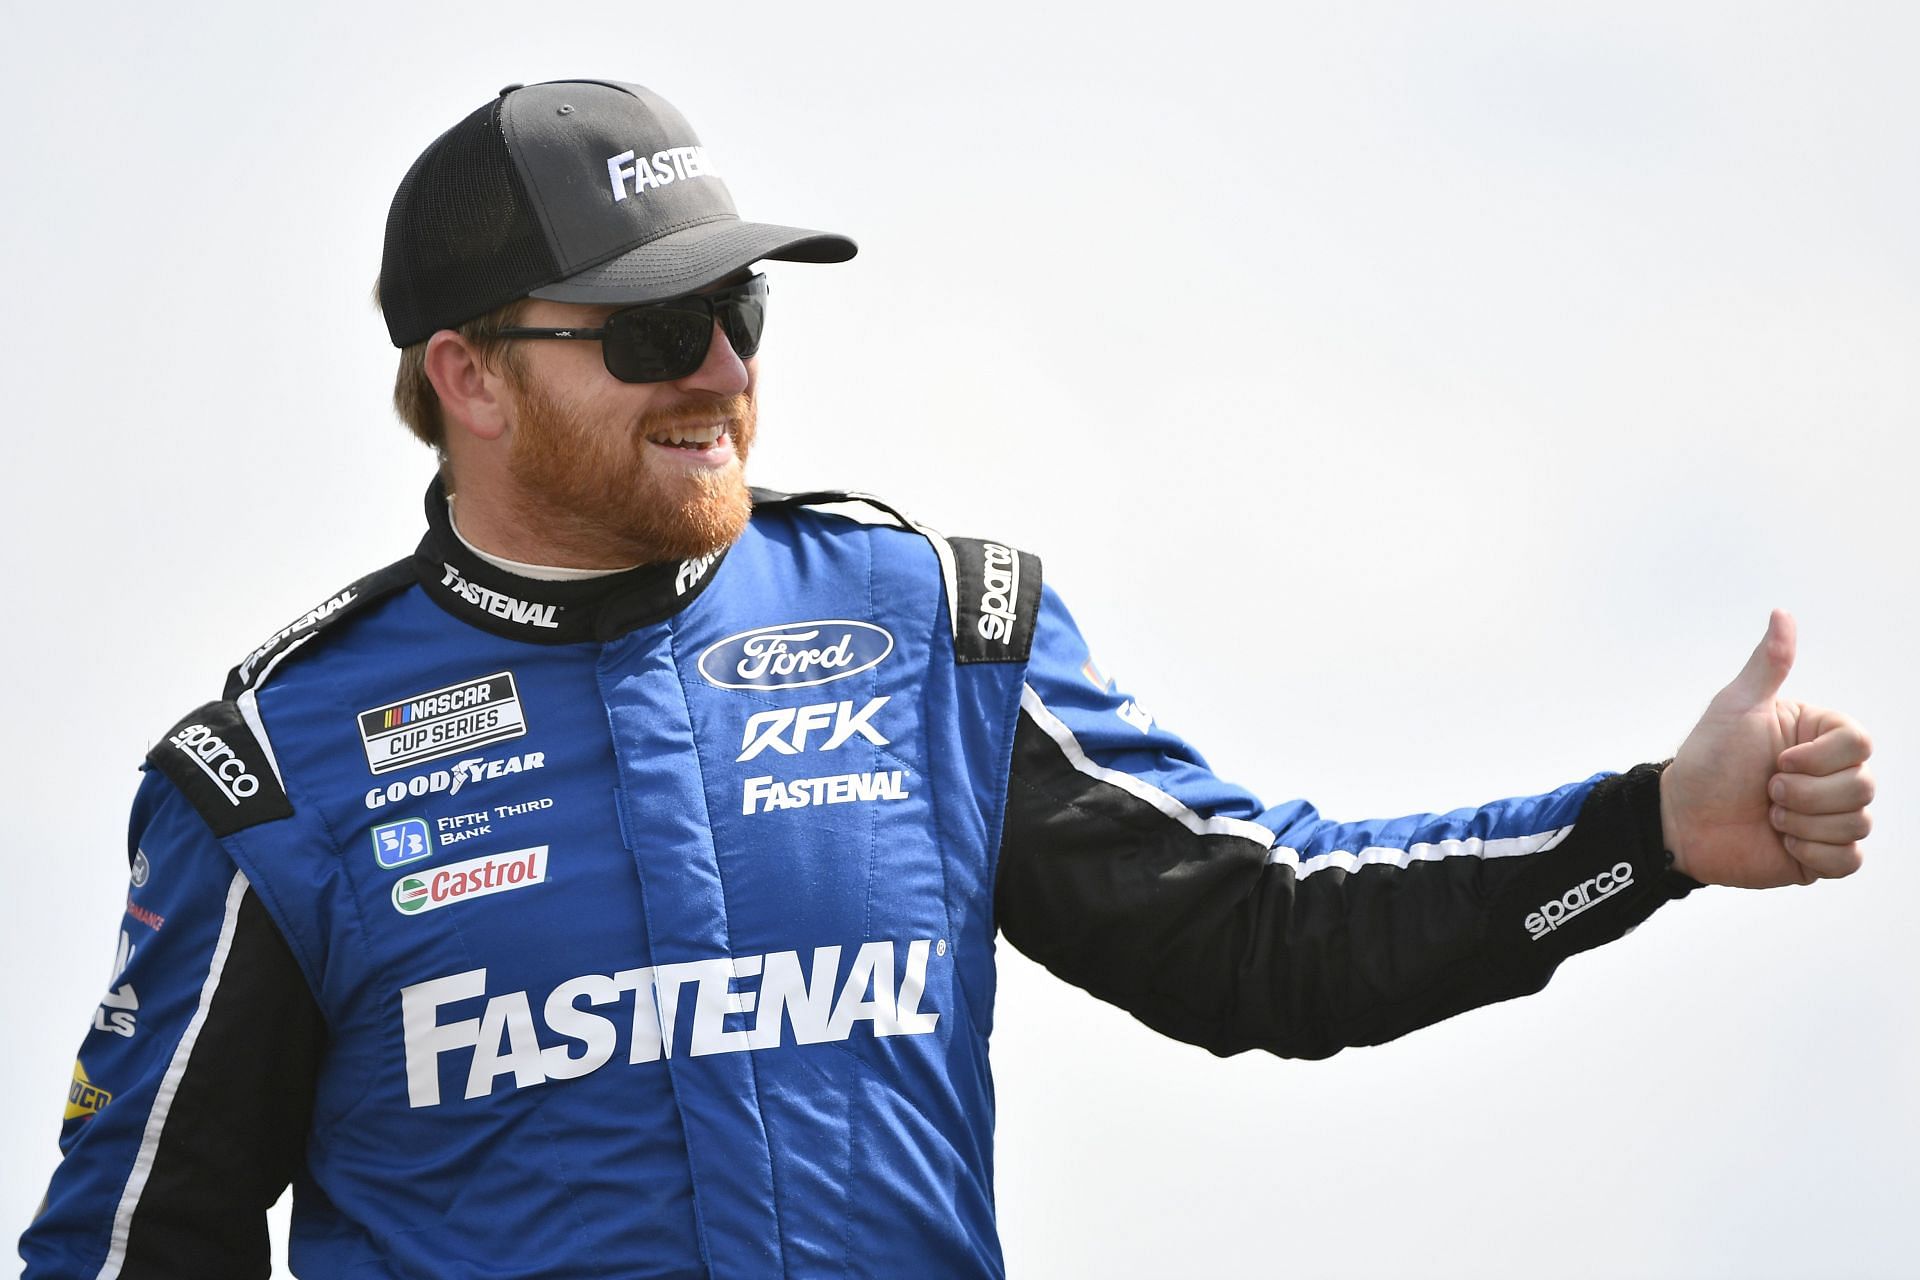 Chris Buescher gives a thumbs up to fans onstage during driver intros before the 2022 NASCAR Cup Series Ally 400 at Nashville Superspeedway in Lebanon, Tennessee. (Photo by Logan Riely/Getty Images)